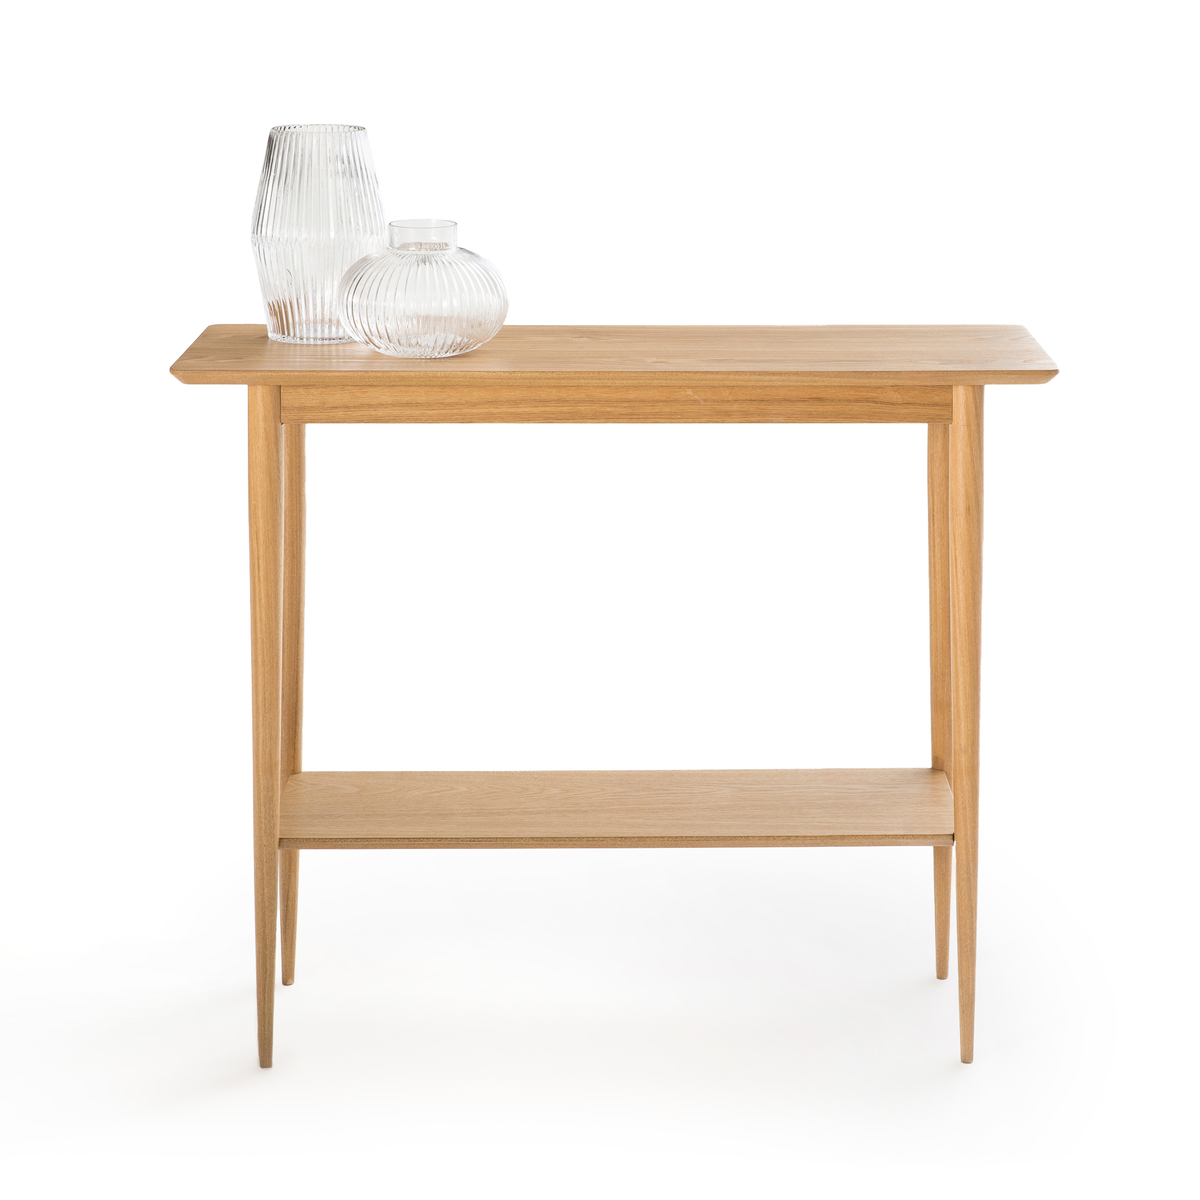 Lussan Double Top Ash Console Table